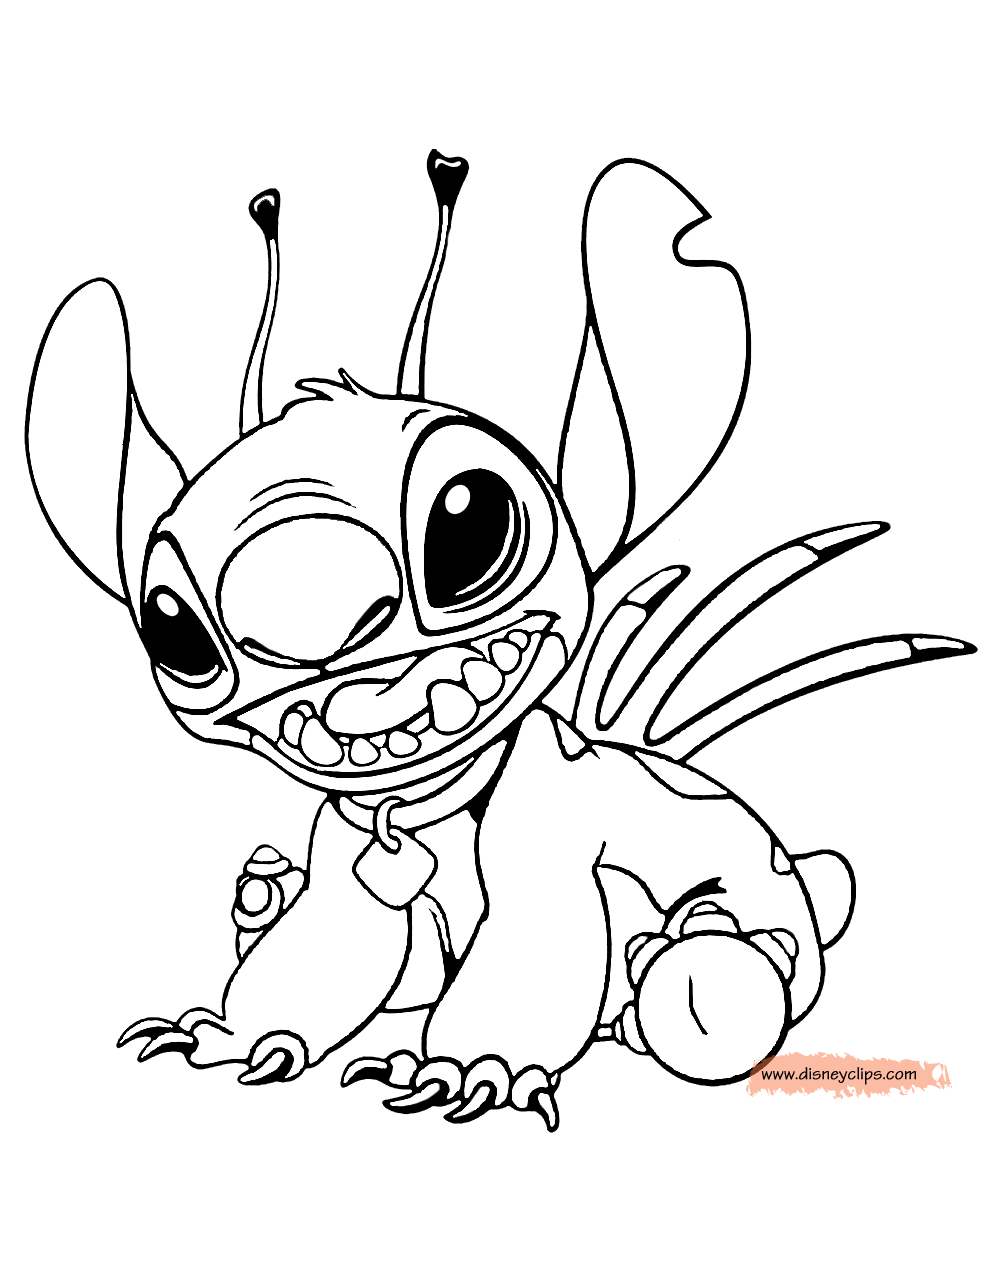 Stitch Coloring Page   Coloring Home